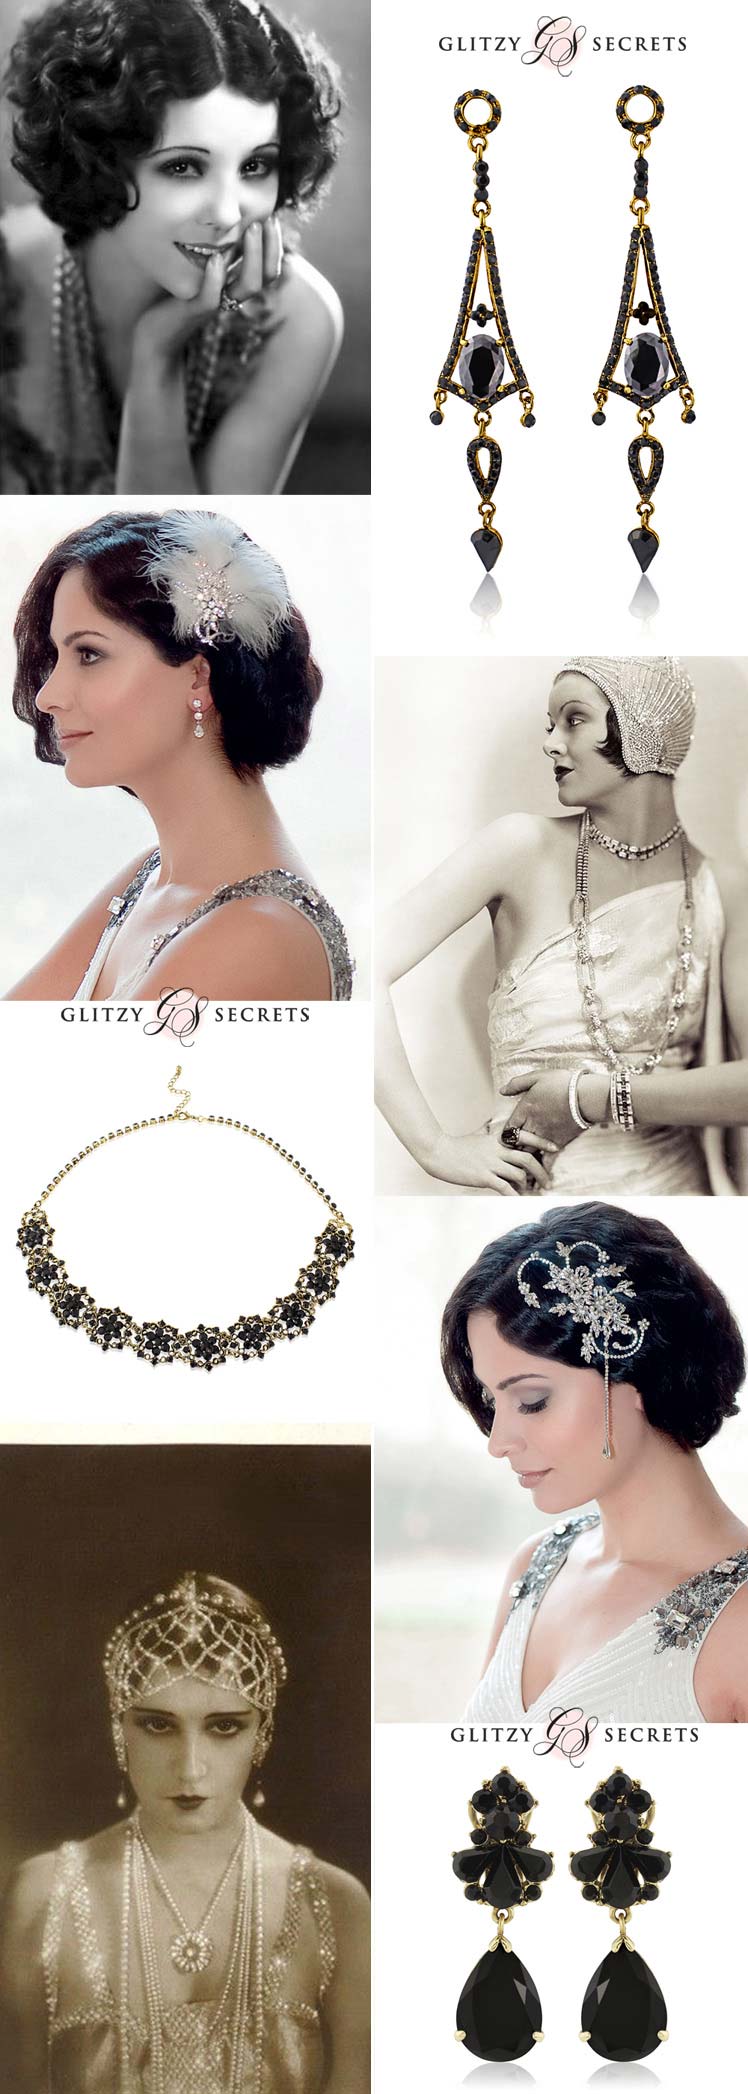 The history of 1920s jewellery design